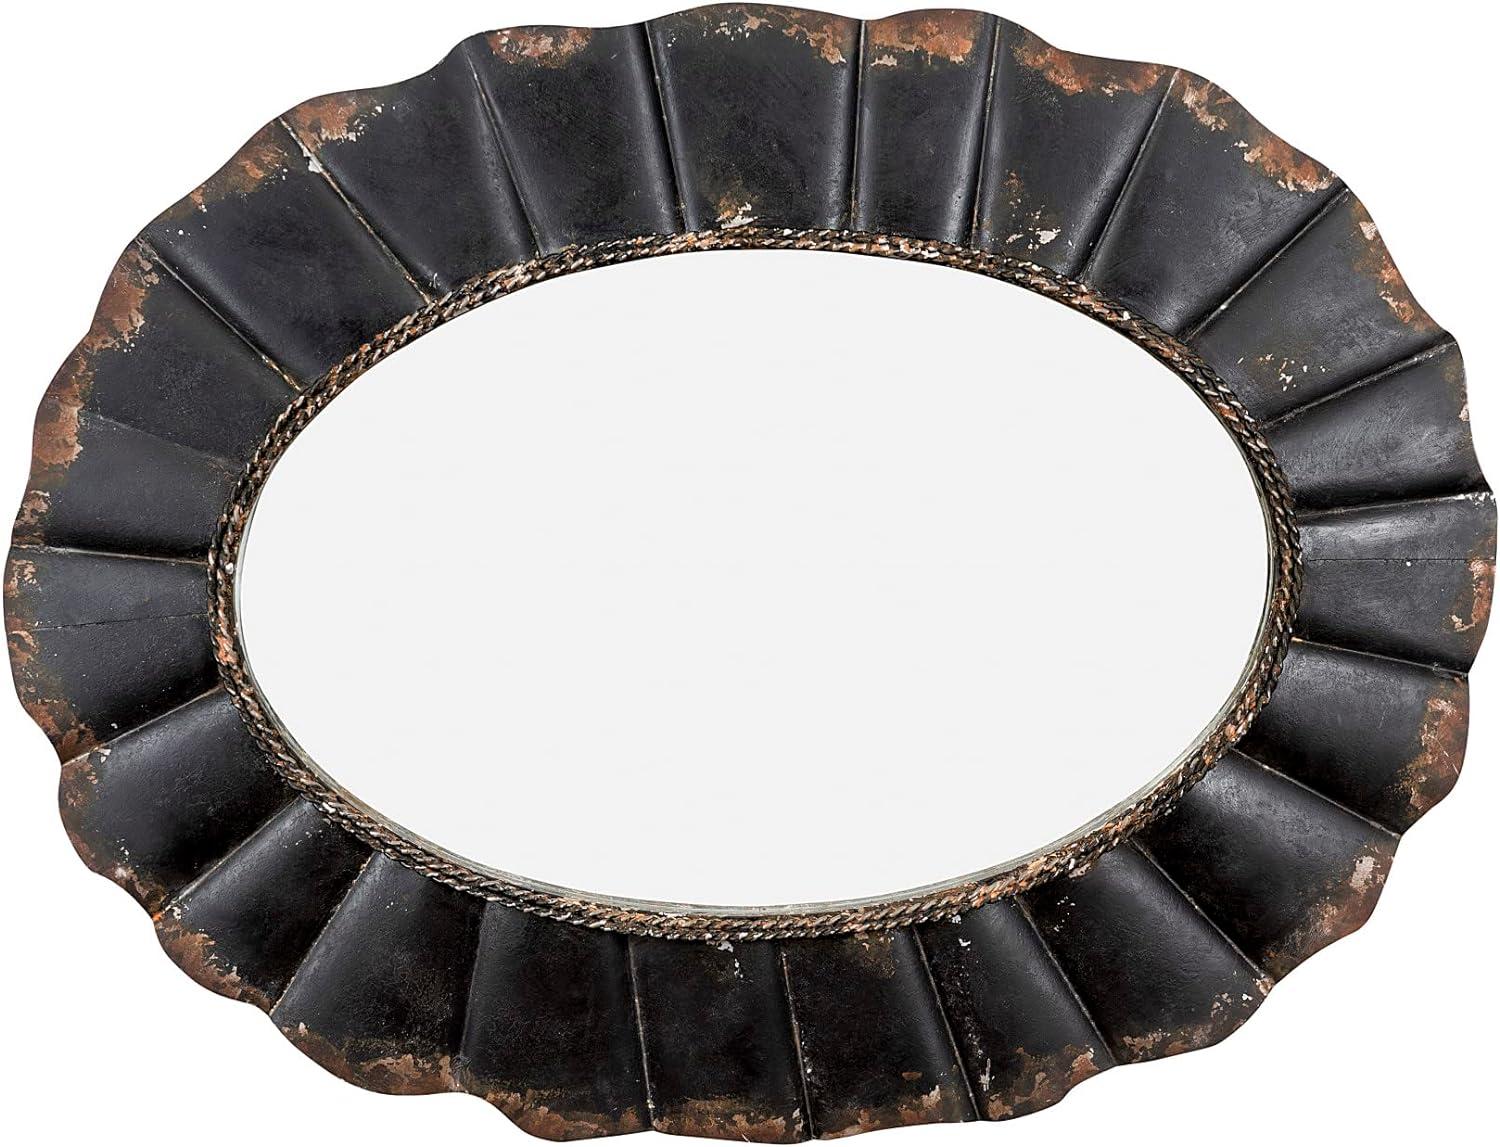 Elegant Full-Length Oval Wooden Mirror with Silver Accents, 24"x31"